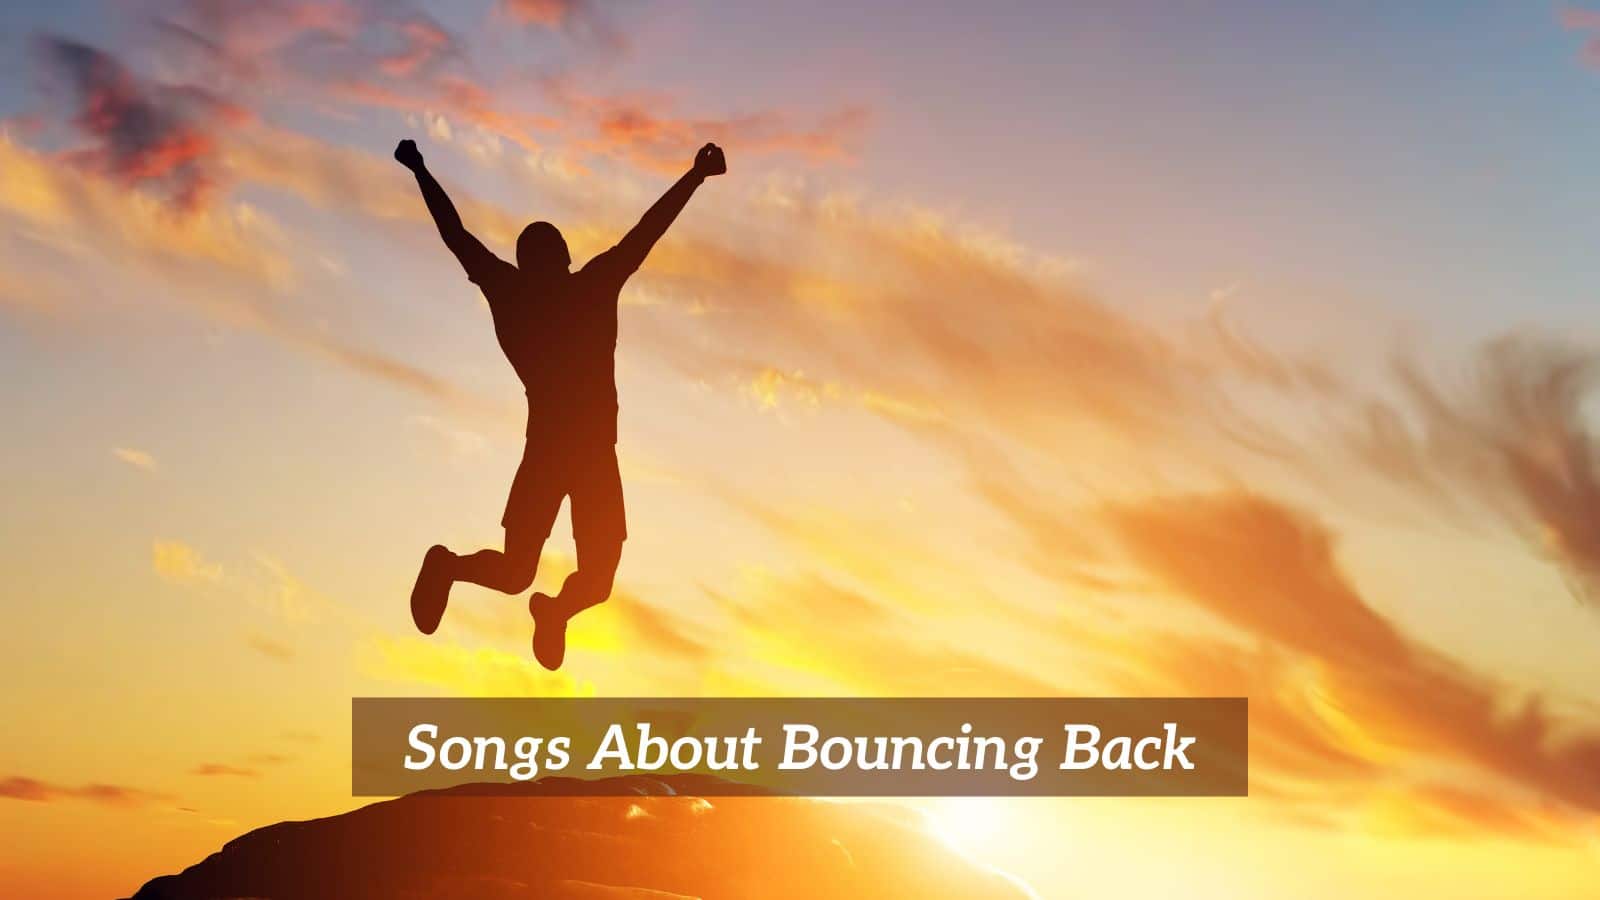 Songs About Bouncing Back